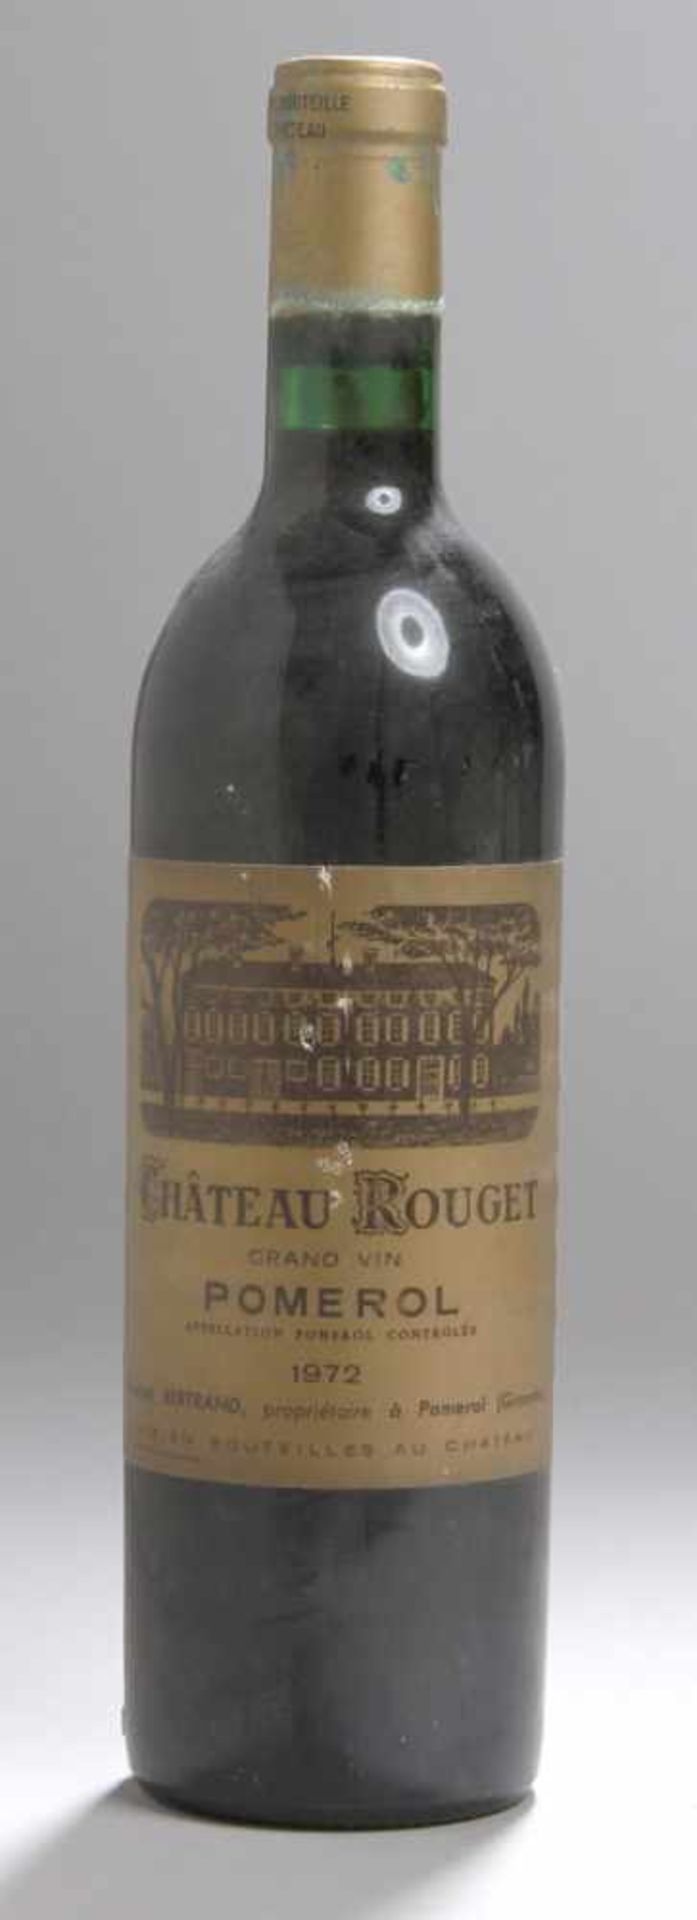 Weinflasche, Chateau Rouget, Grand Vin, Pomerol, 1972